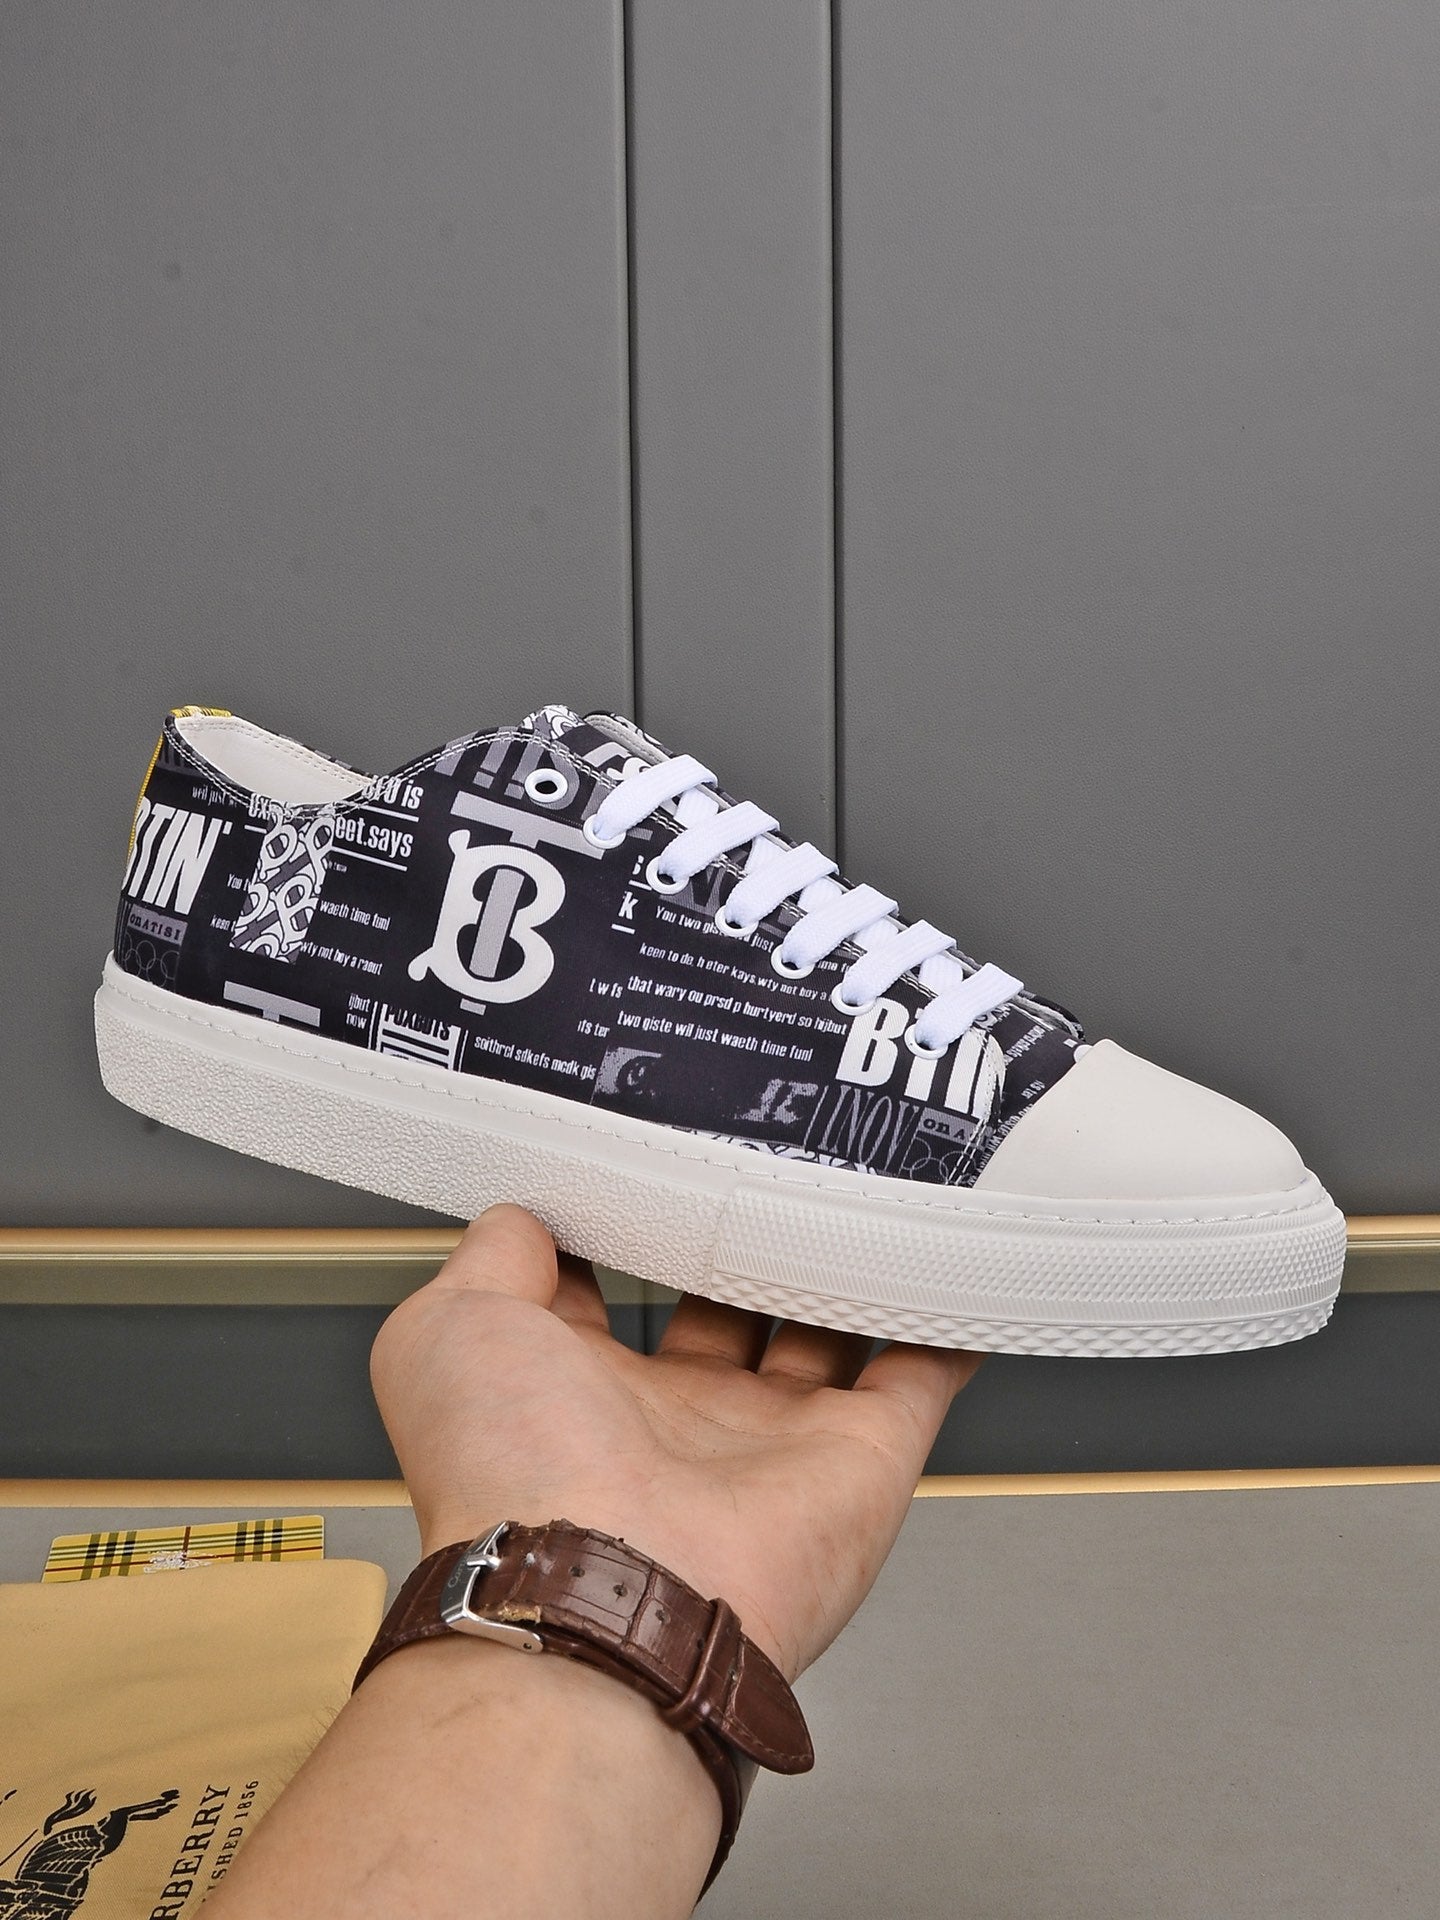 B family upgraded 2022 men's casual shoes